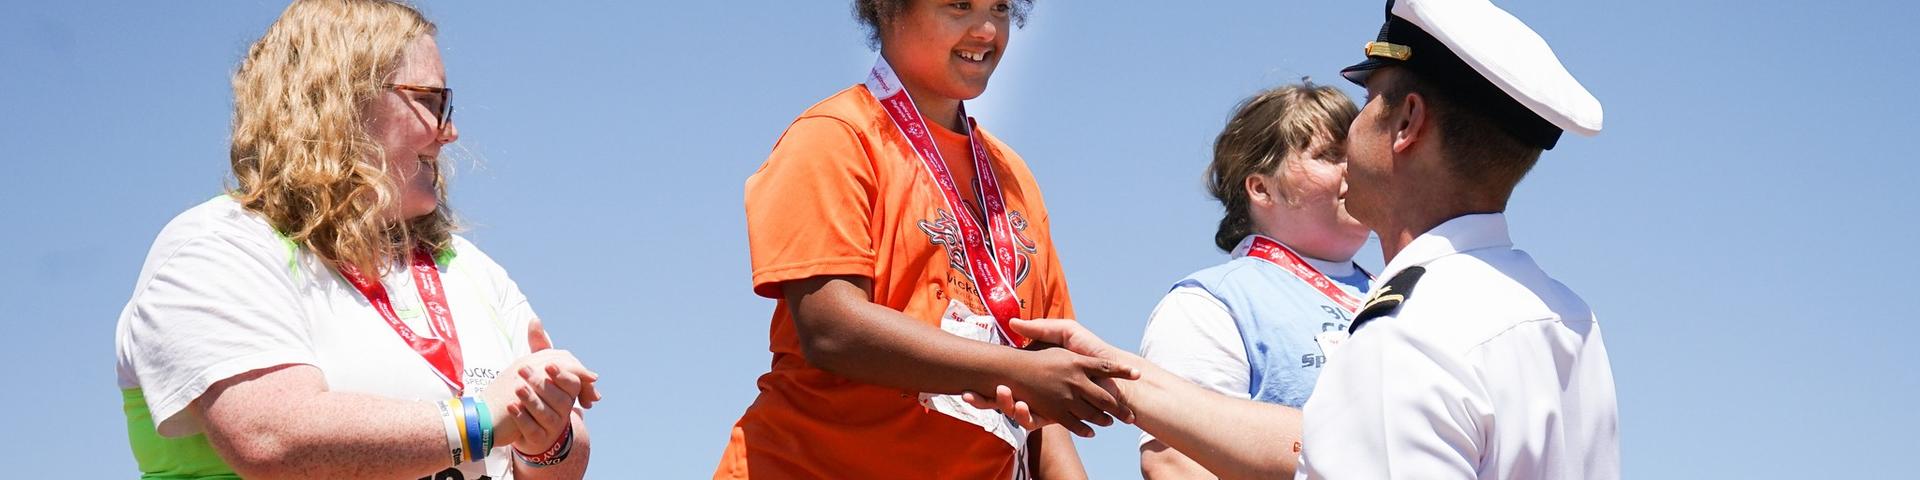 Special Olympics Athletes receiving medals at an award ceremony 